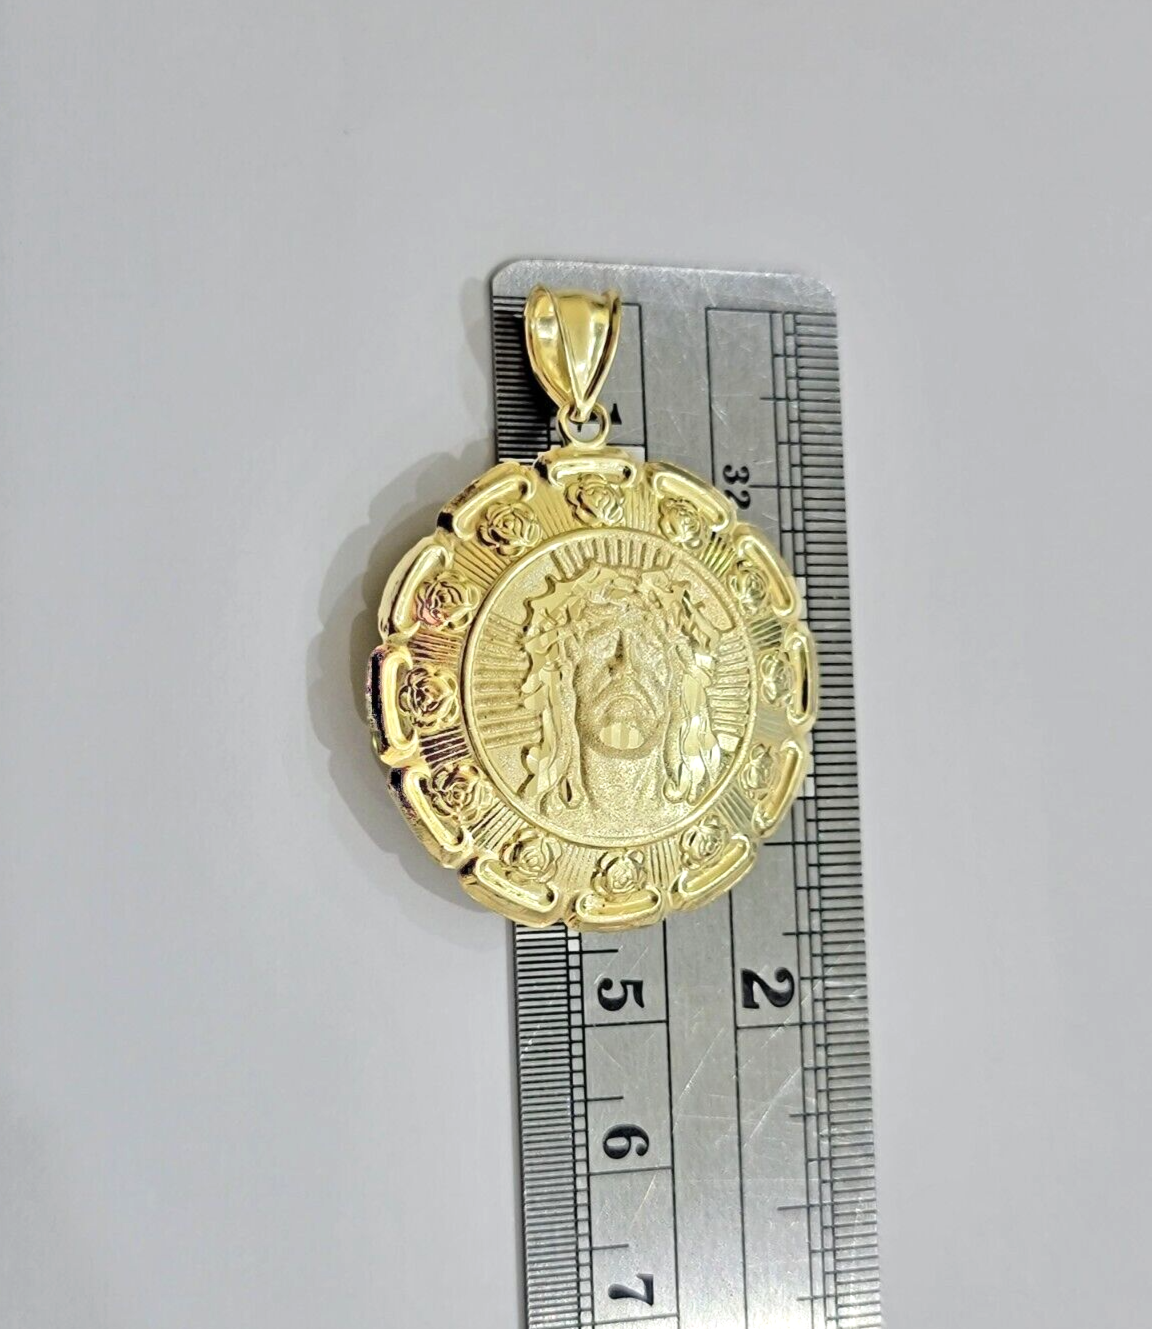 Real 10k Jesus Virgin Mary Charm Pendant Yellow Gold 1.8 Inch Chain Necklace New